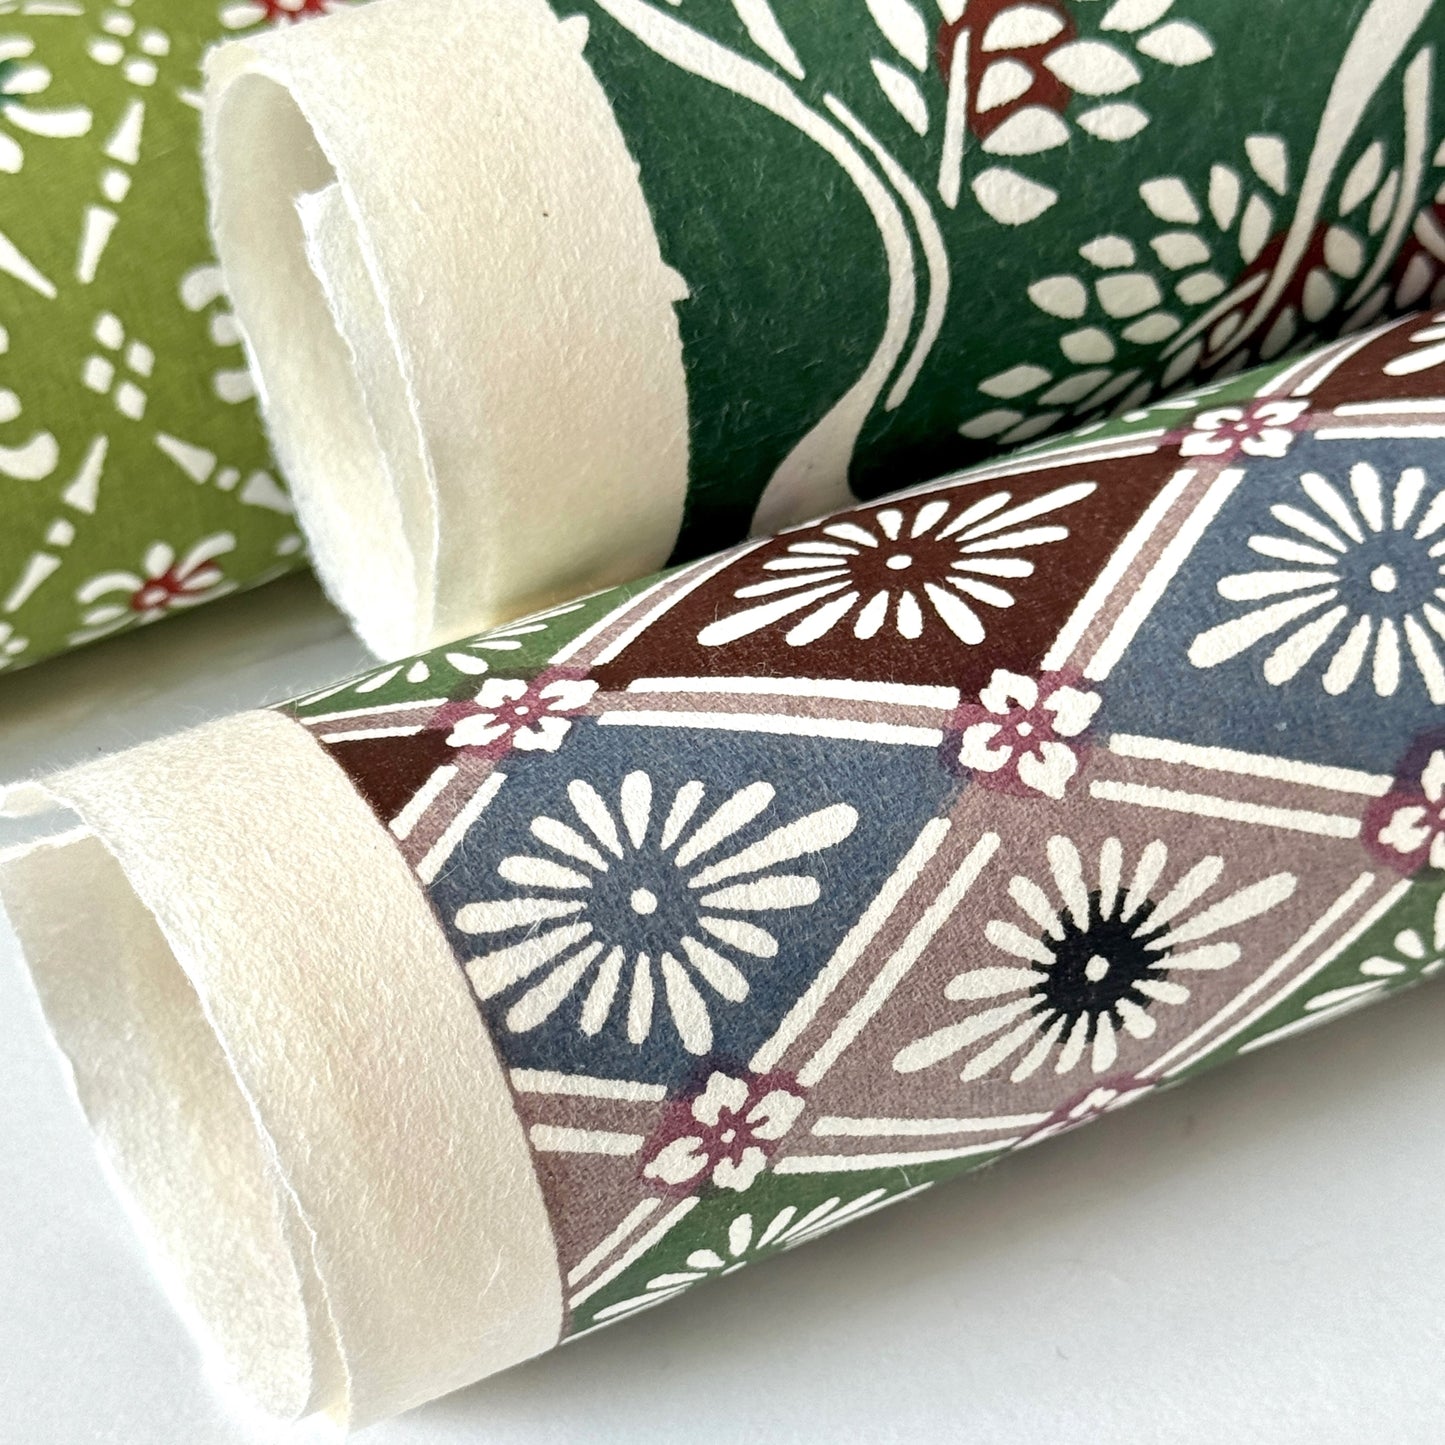 A Japanese stencil-dyed patterned paper with a repeat diamond floral pattern in blue, taupe, green and brown. Close-up rolled